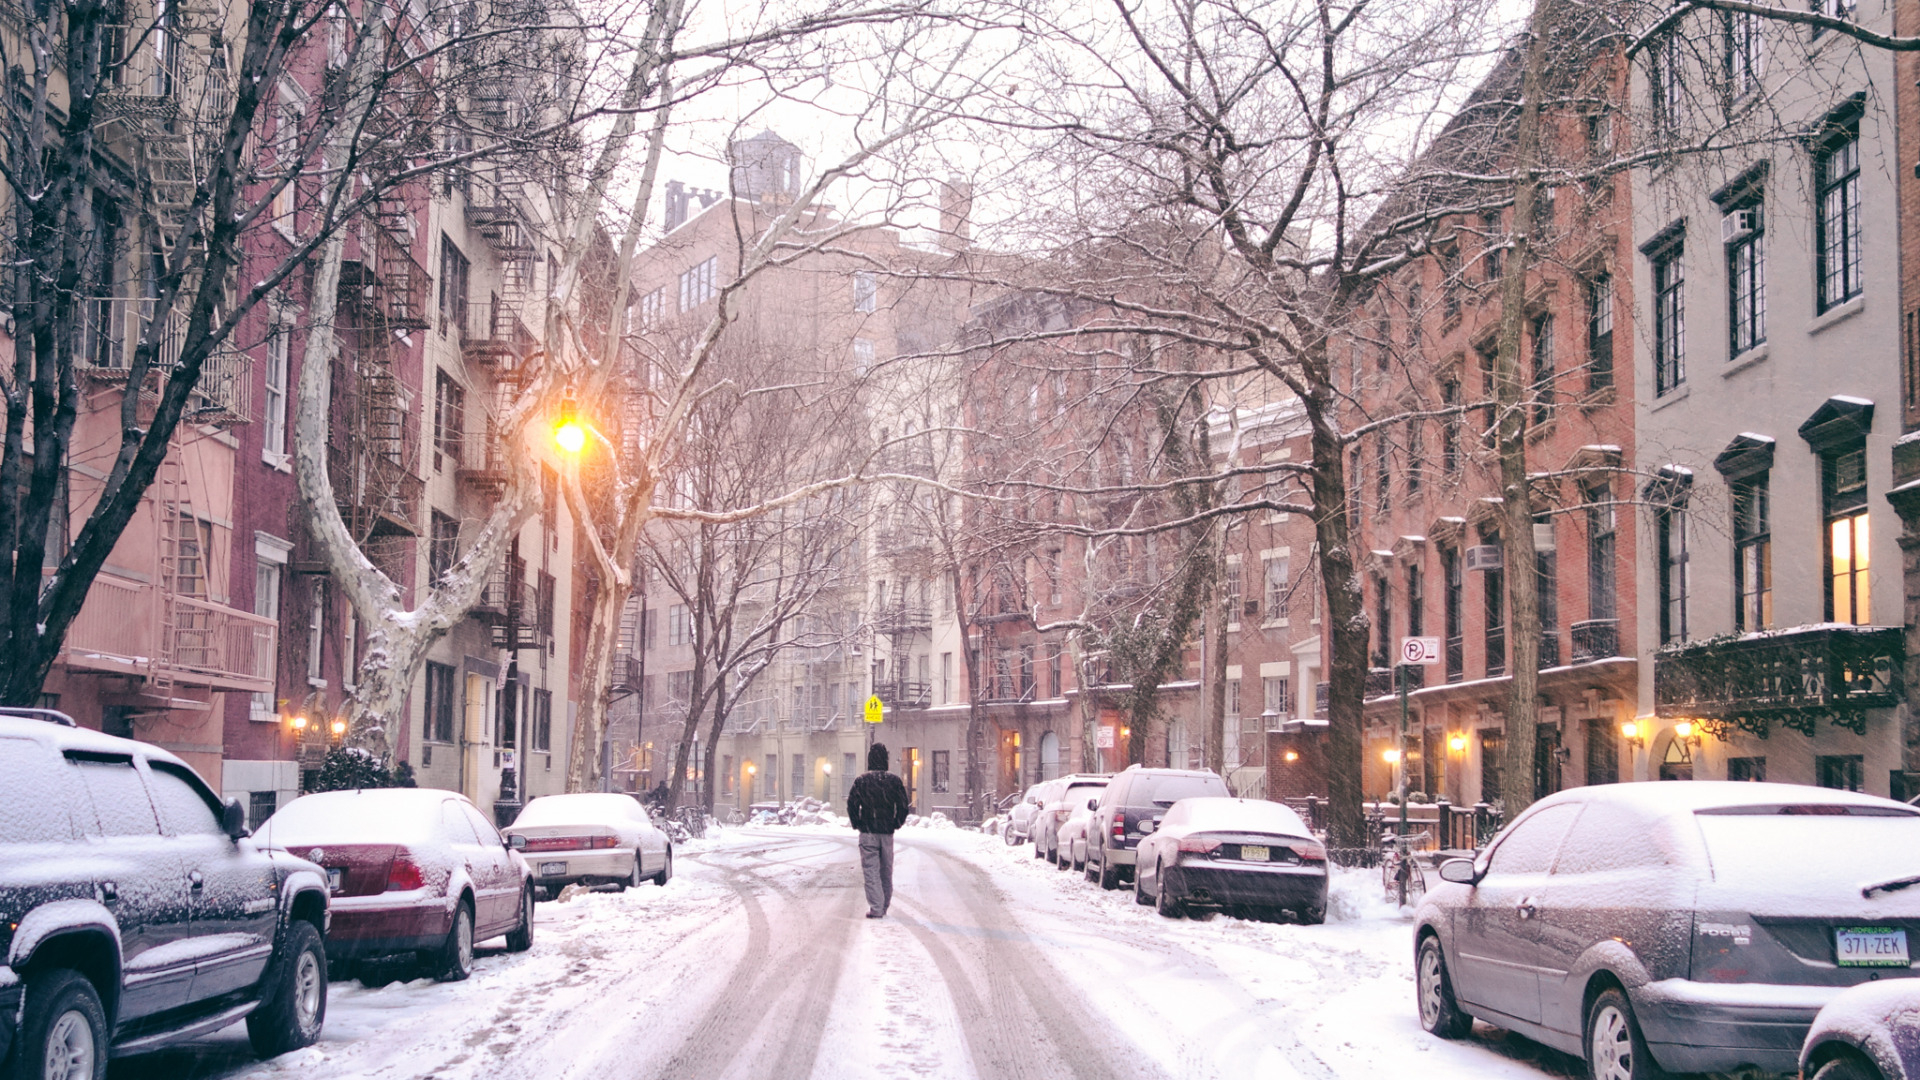 1920x1080 Download wallpaper car, USA, United States, Winter, New York, Manhattan, NYC, Snow, man, Road, America, vehicles, United States of America, New York City Snow on a Winter Evening in the West